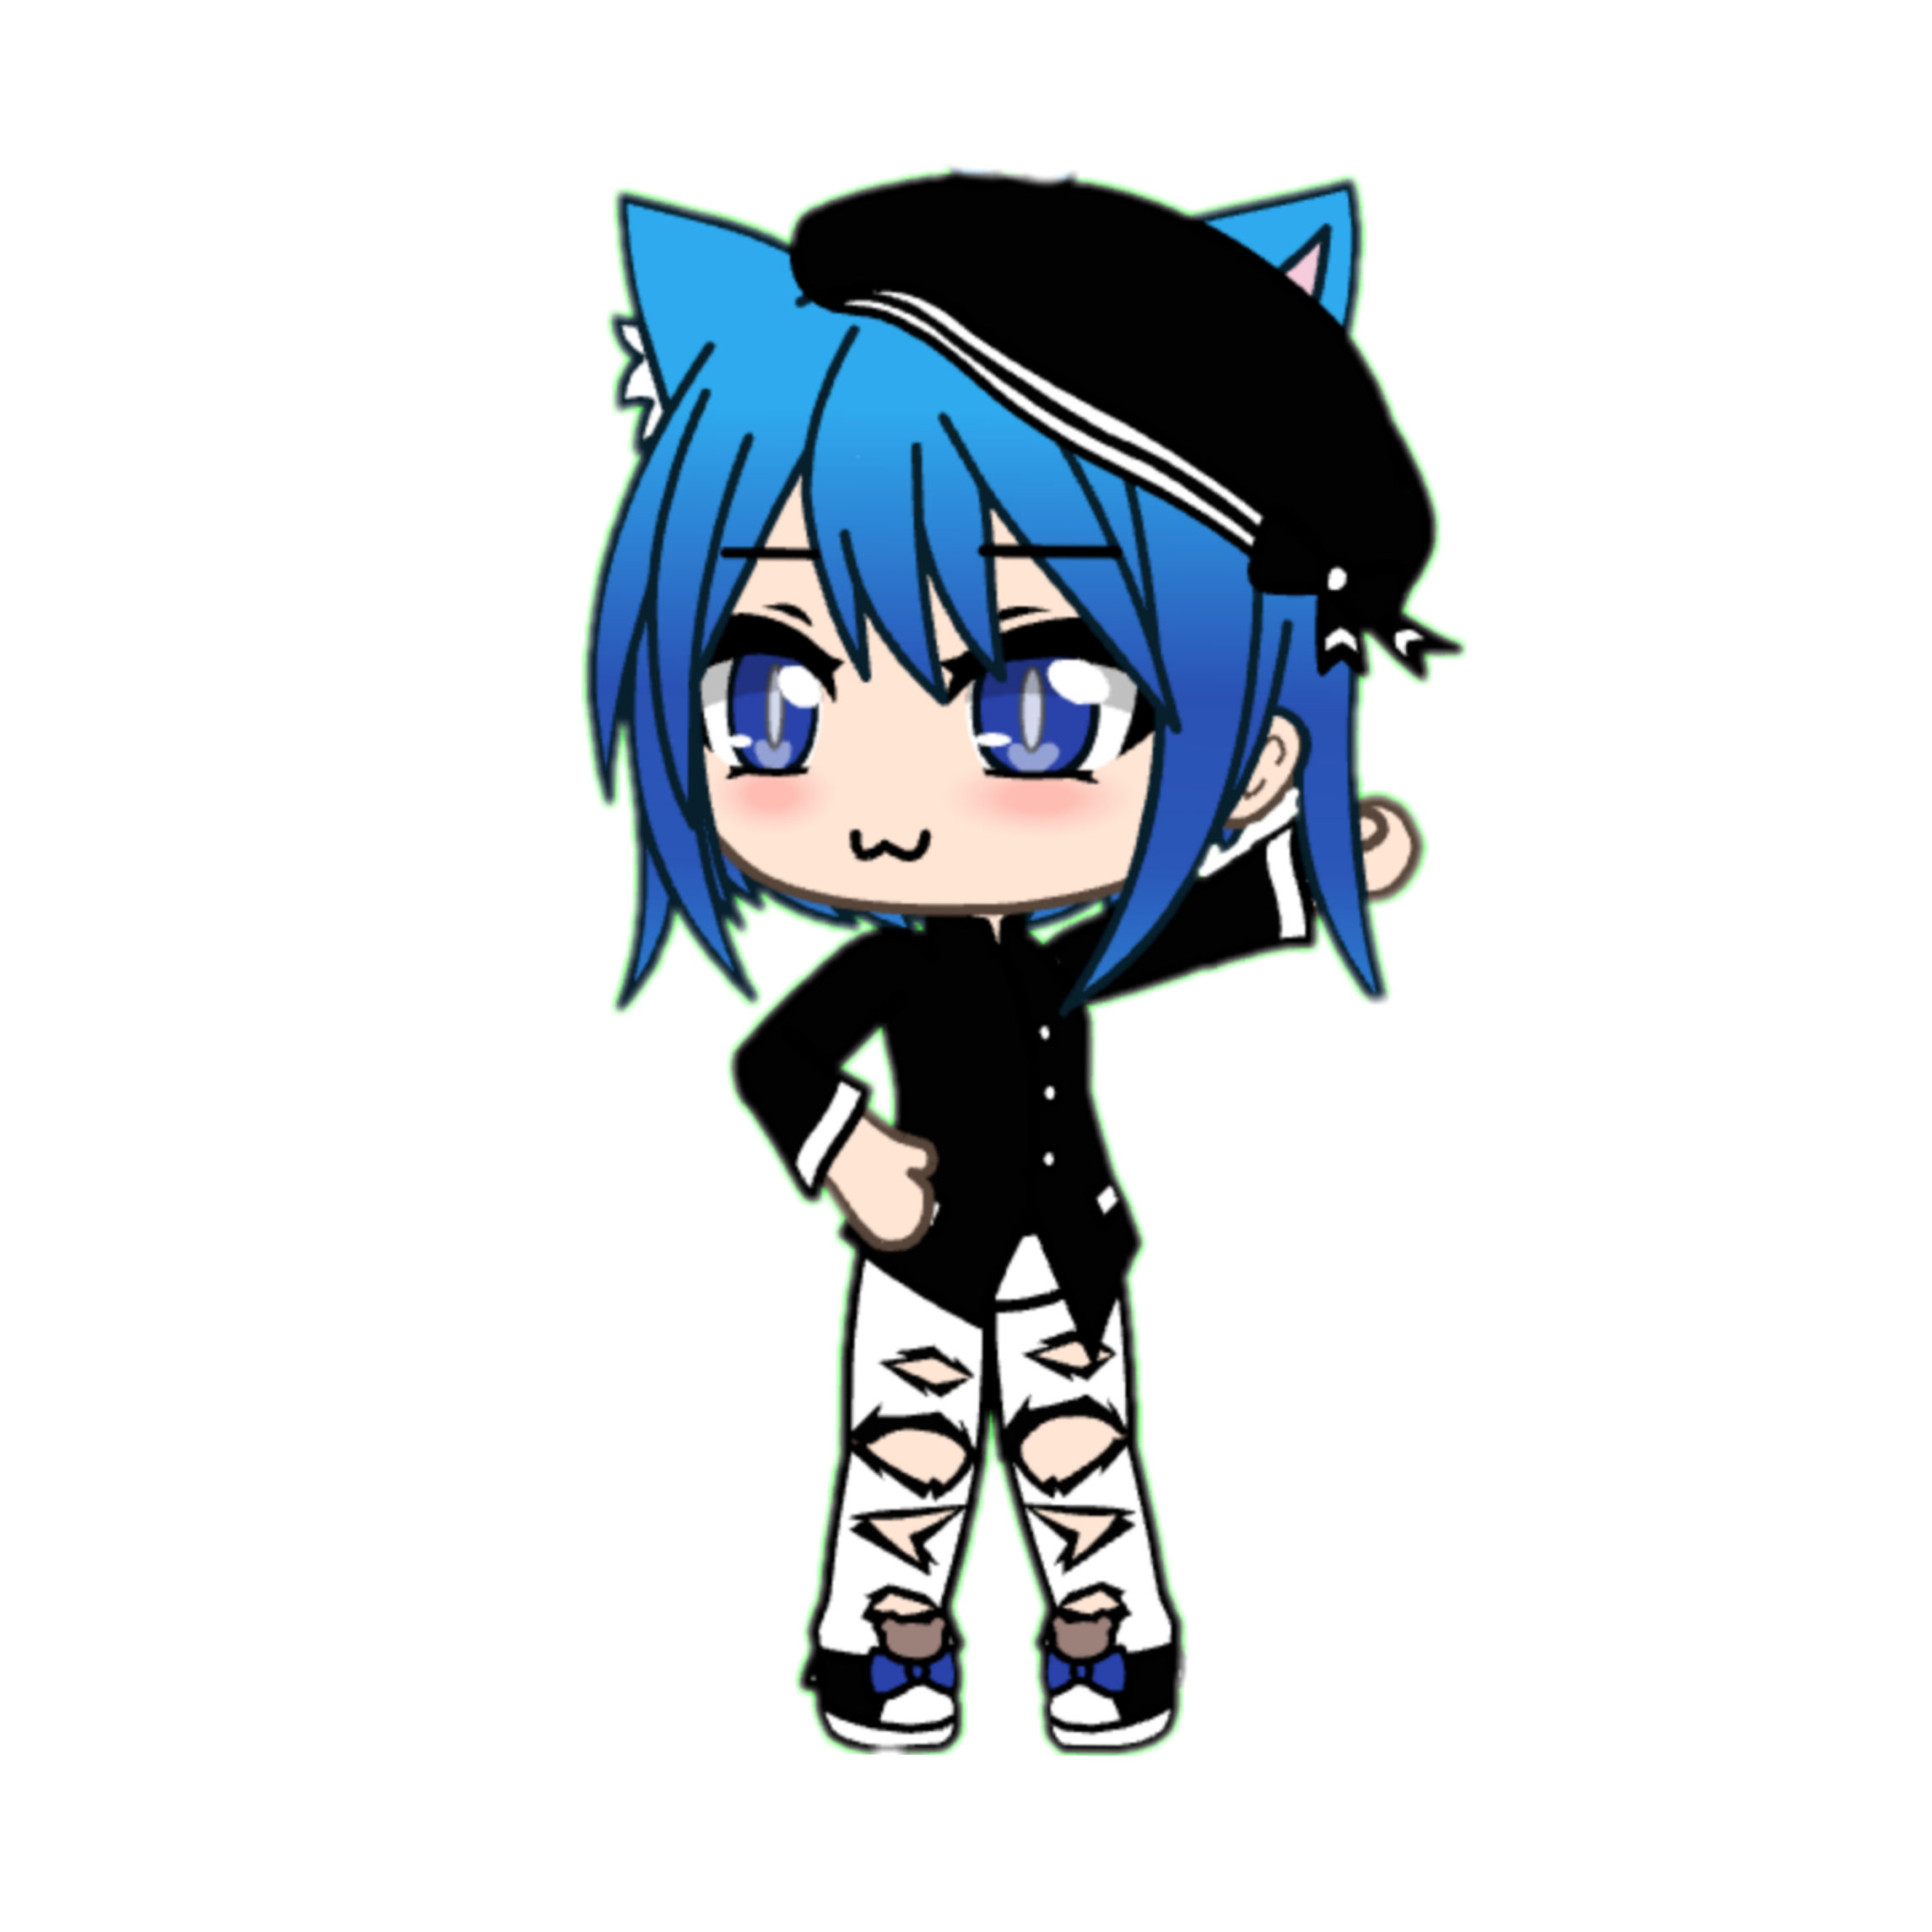 Cute Transparent Poser Aliexpress 0c38a 5e749 - roblox anime girl with blue hair decal download cute blue and purple anime girls hd png download transparent png image pngitem